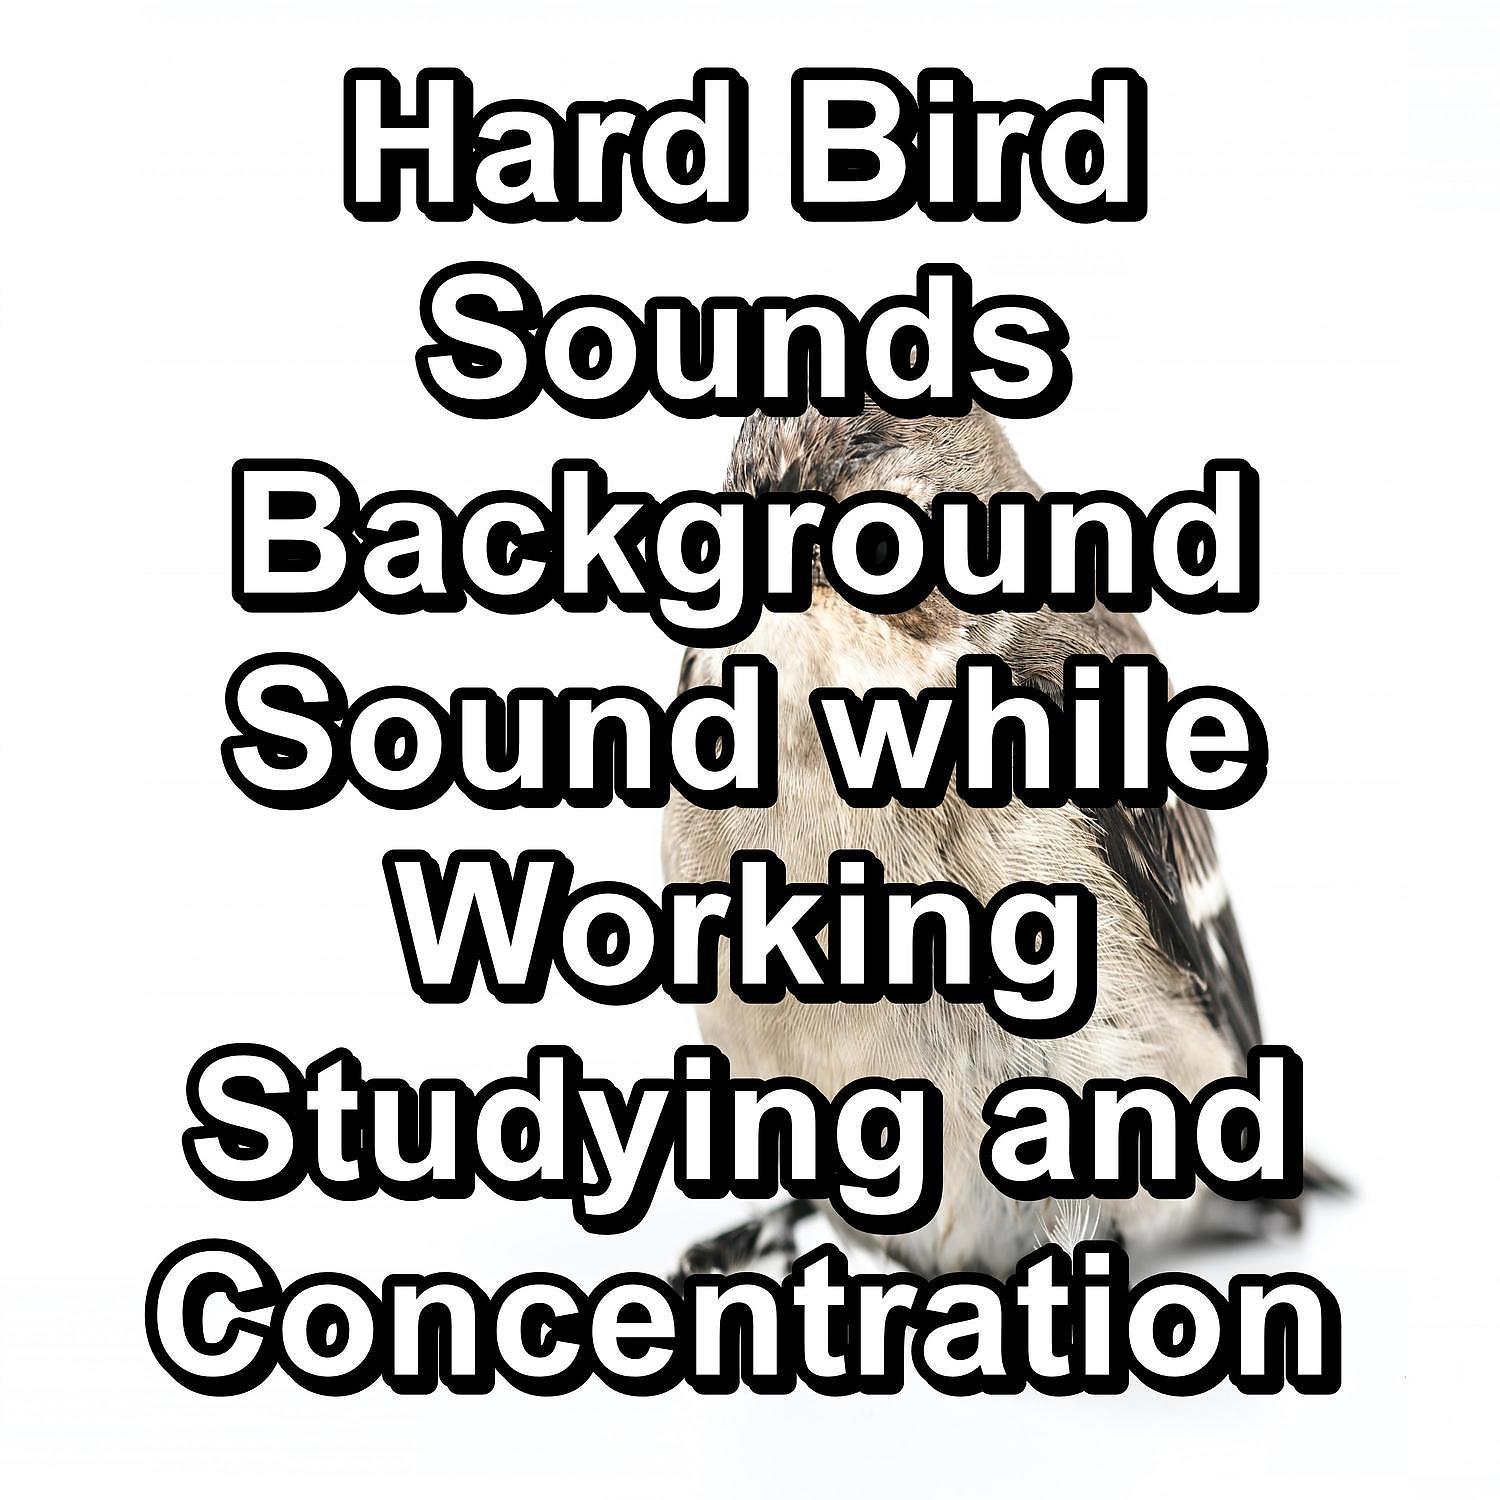 Постер альбома Hard Bird Sounds Background Sound while Working Studying and Concentration